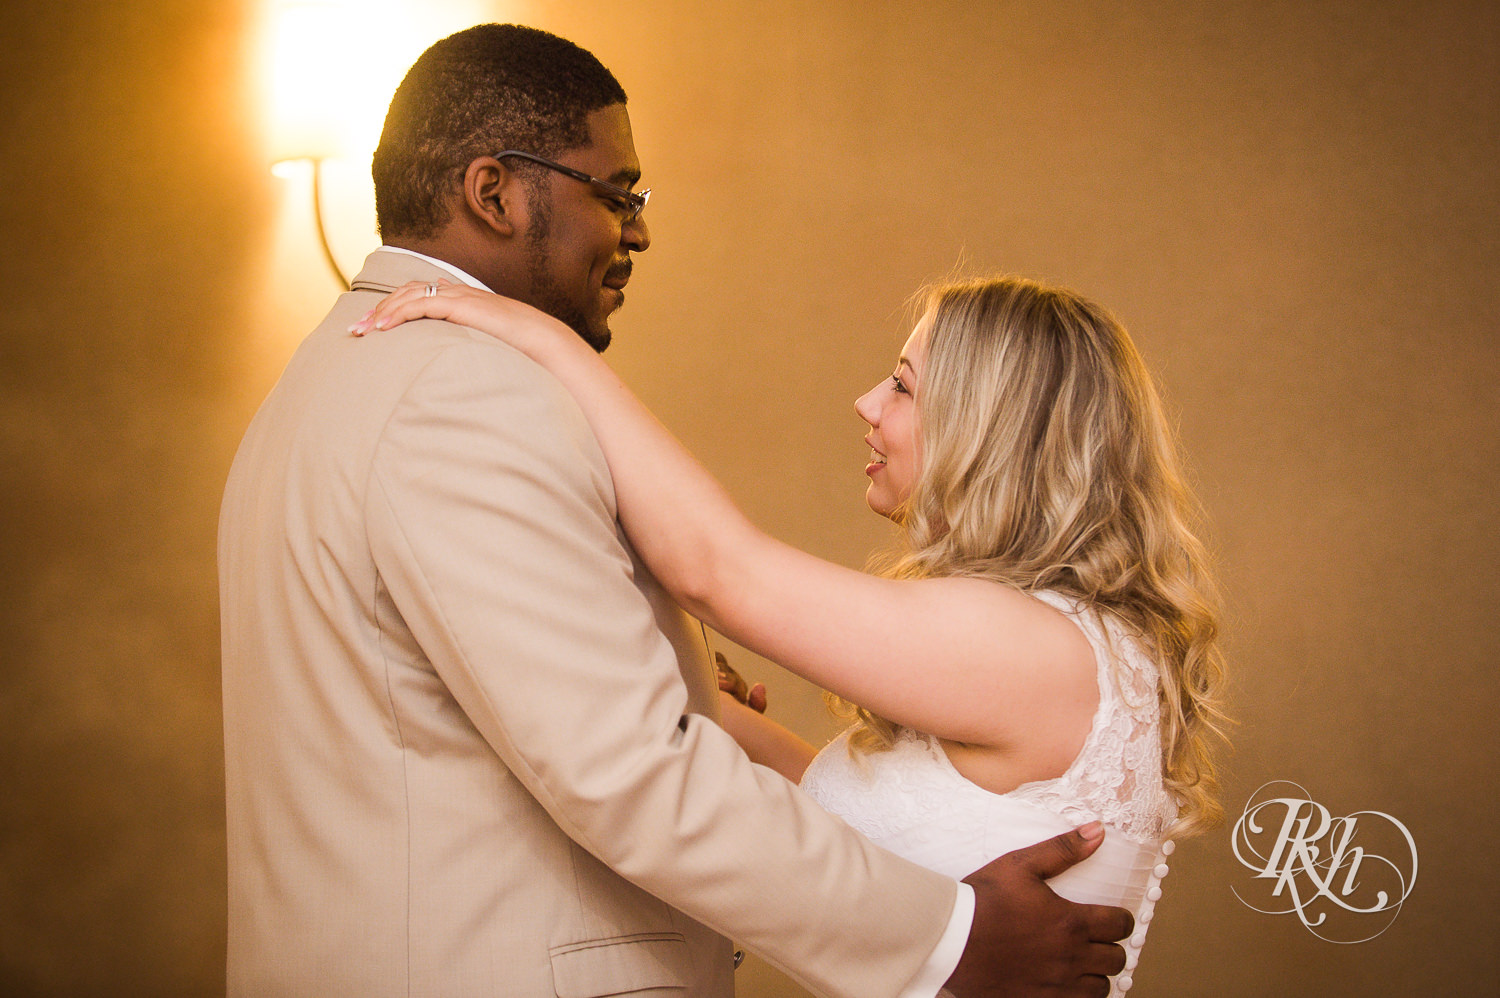 White bride and black groom dance during wedding reception at North Metro Event Center in Shoreview, Minnesota.